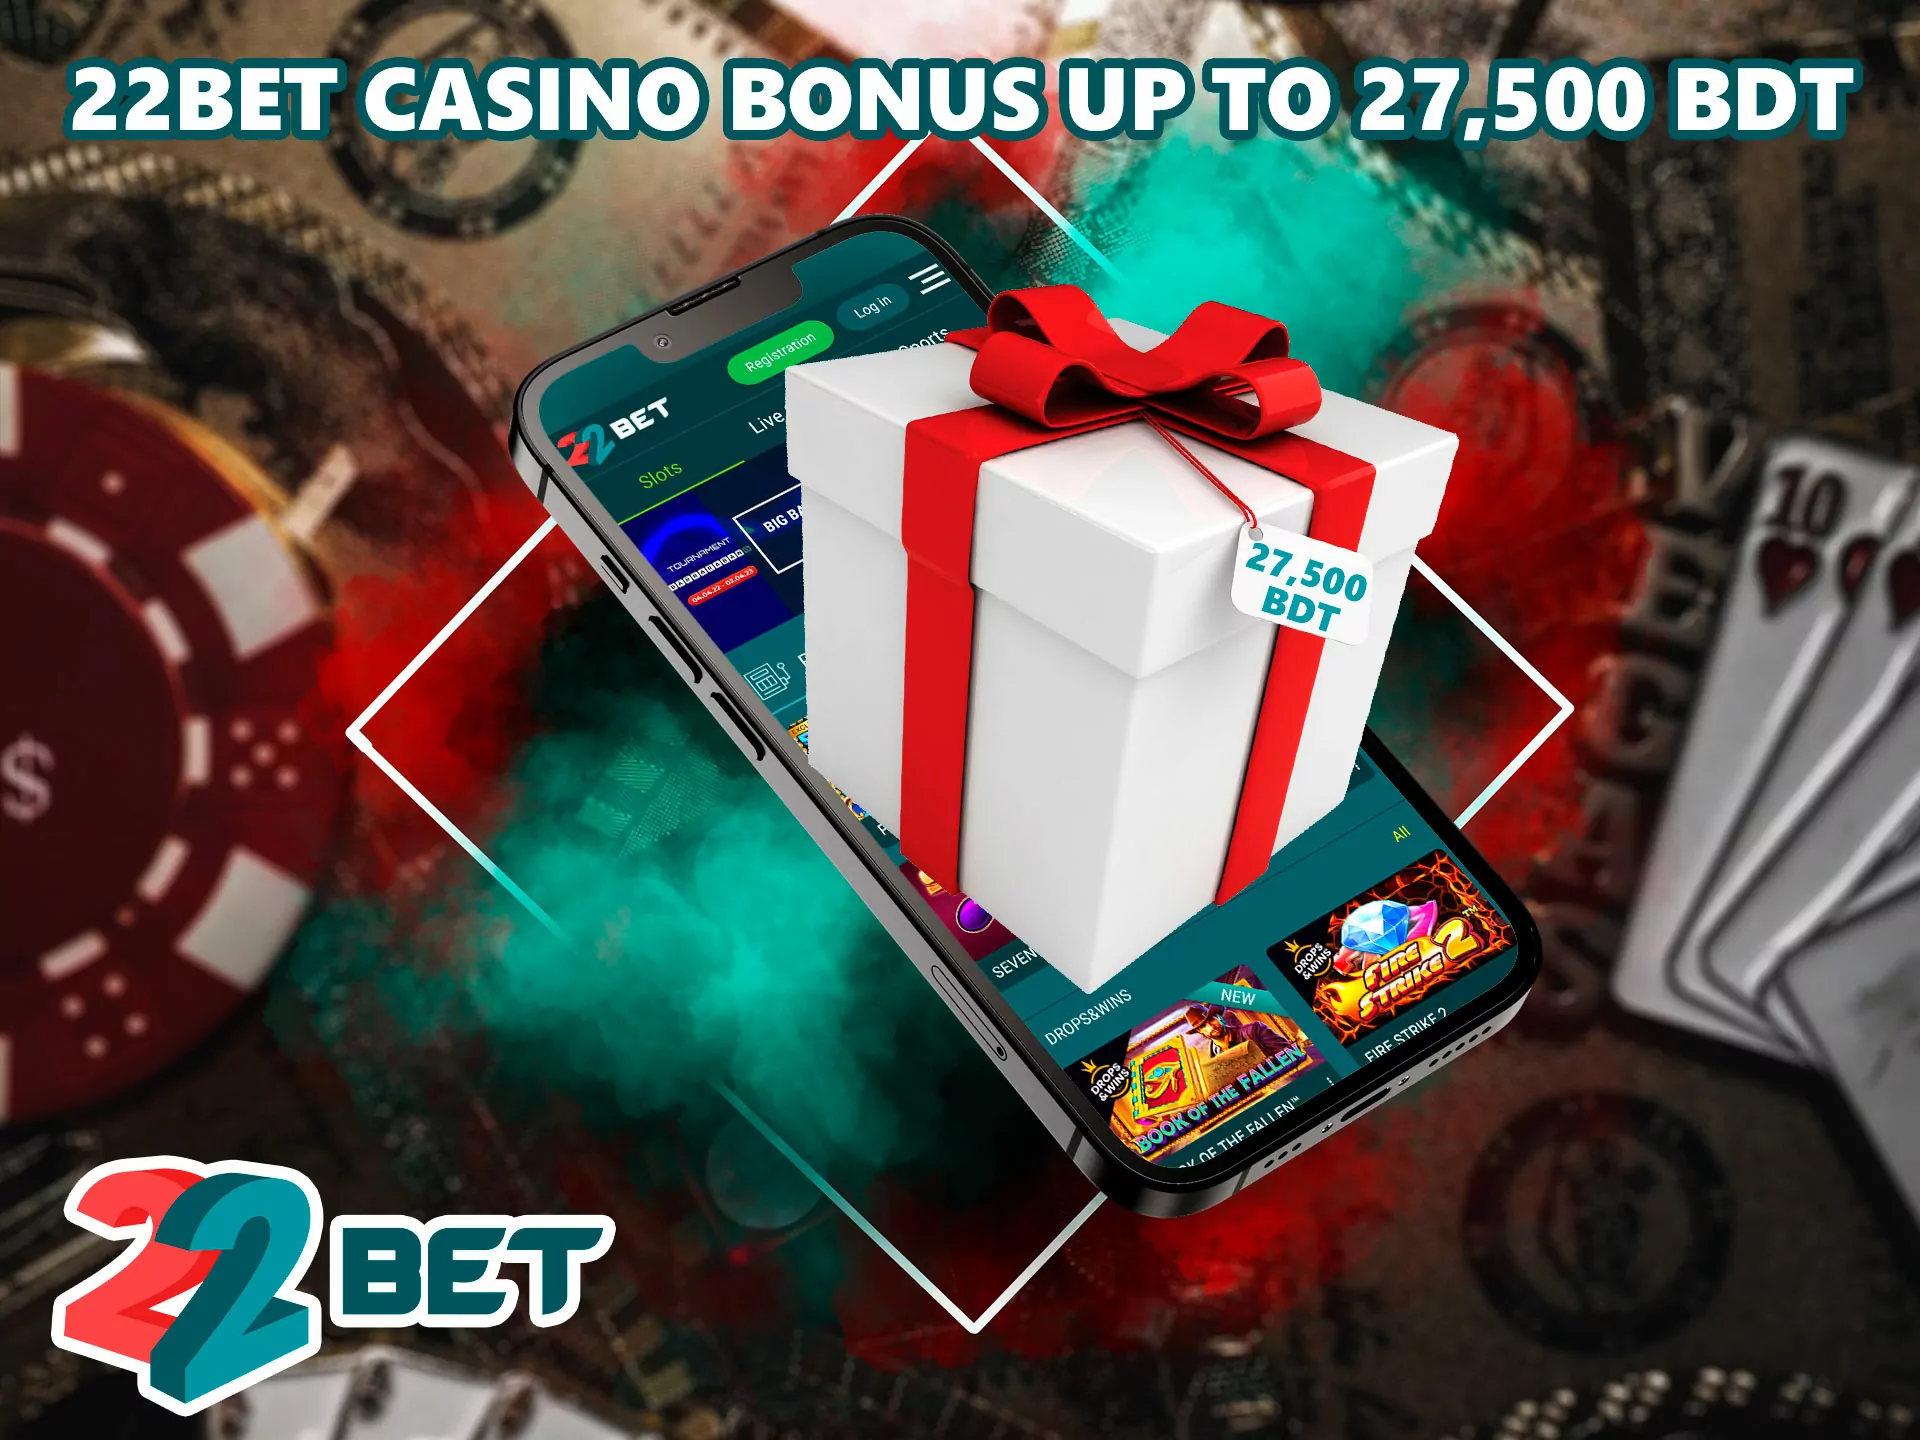 Get up to 27,000 BDT when you deposit from 100 BDT, the offer is available in the casino section.